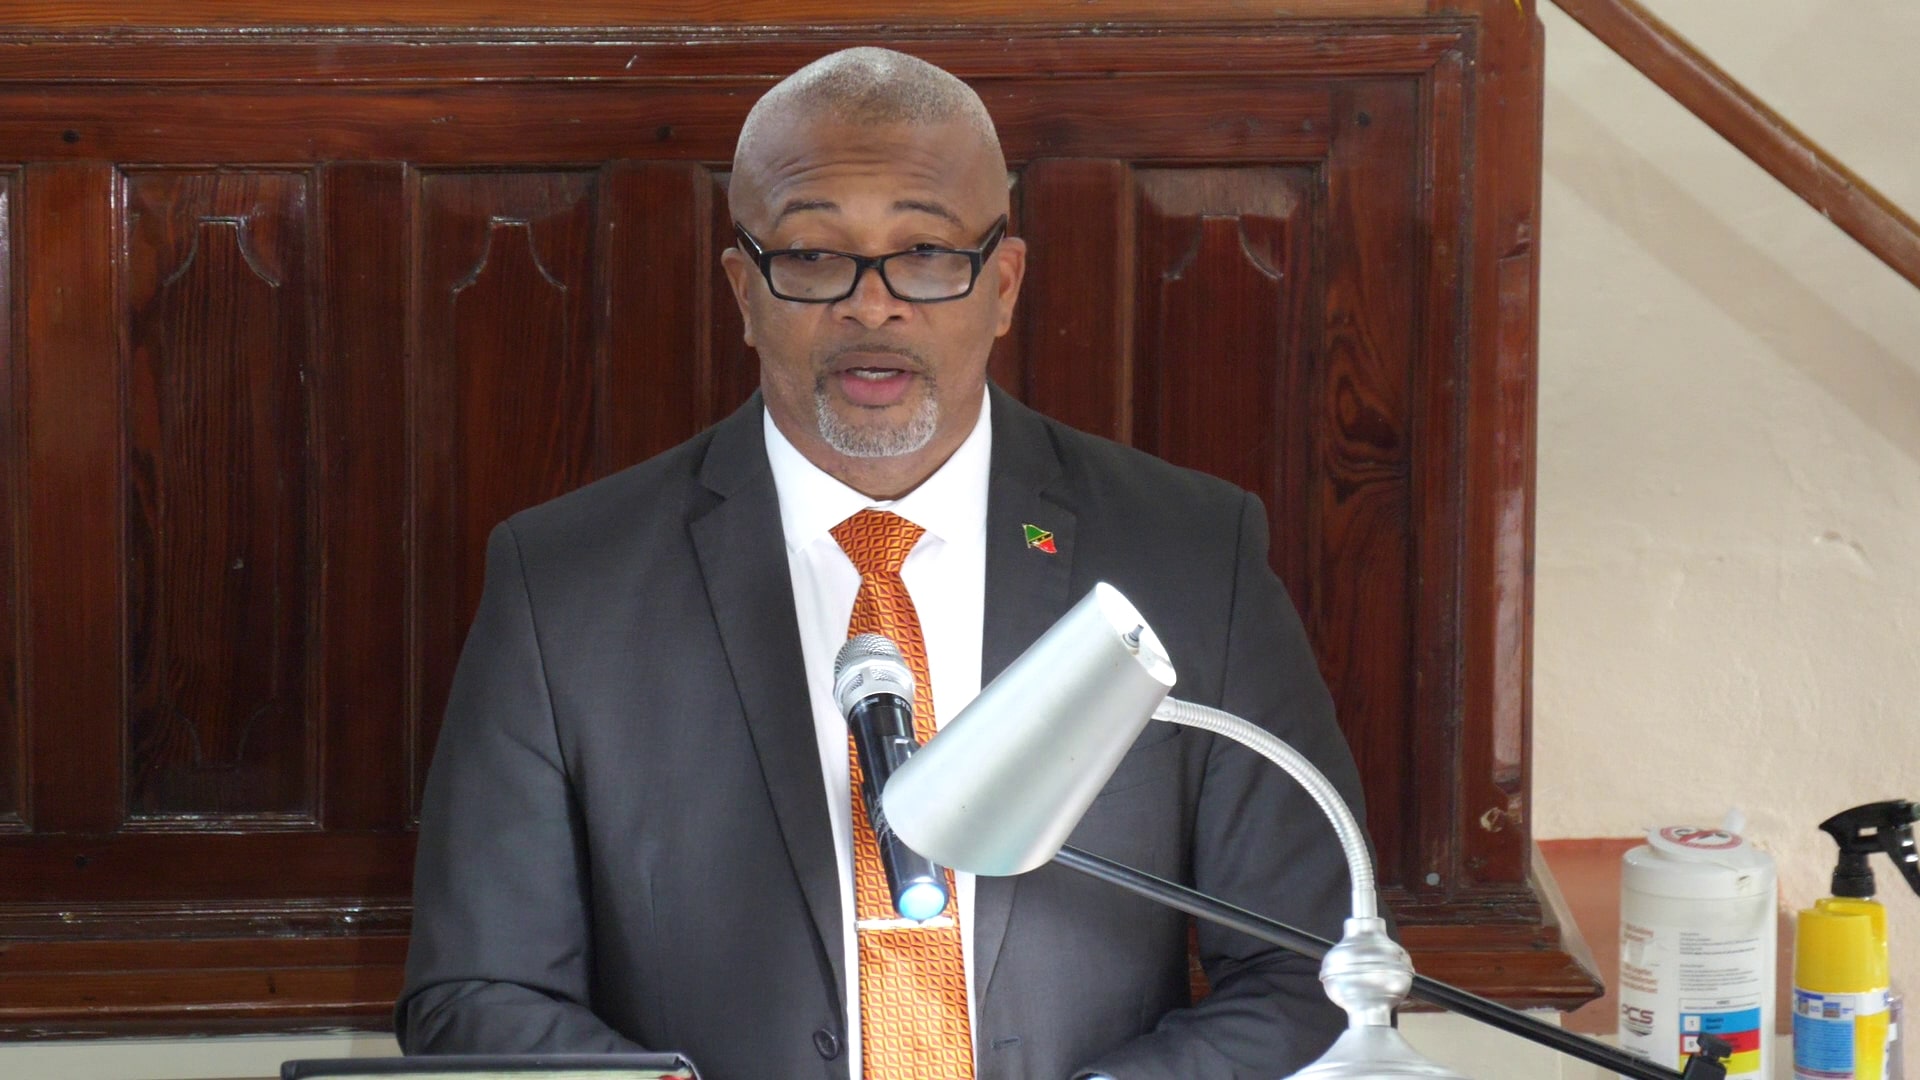 Hon. Spencer Brand, Minister in the Nevis Island Administration, delivering remarks at a special service on September 13, 2020, at the Gingerland Methodist Church to welcome Rev. Franklin Manners, as the new Superintendent Minister of the Methodist Church, Nevis Circuit